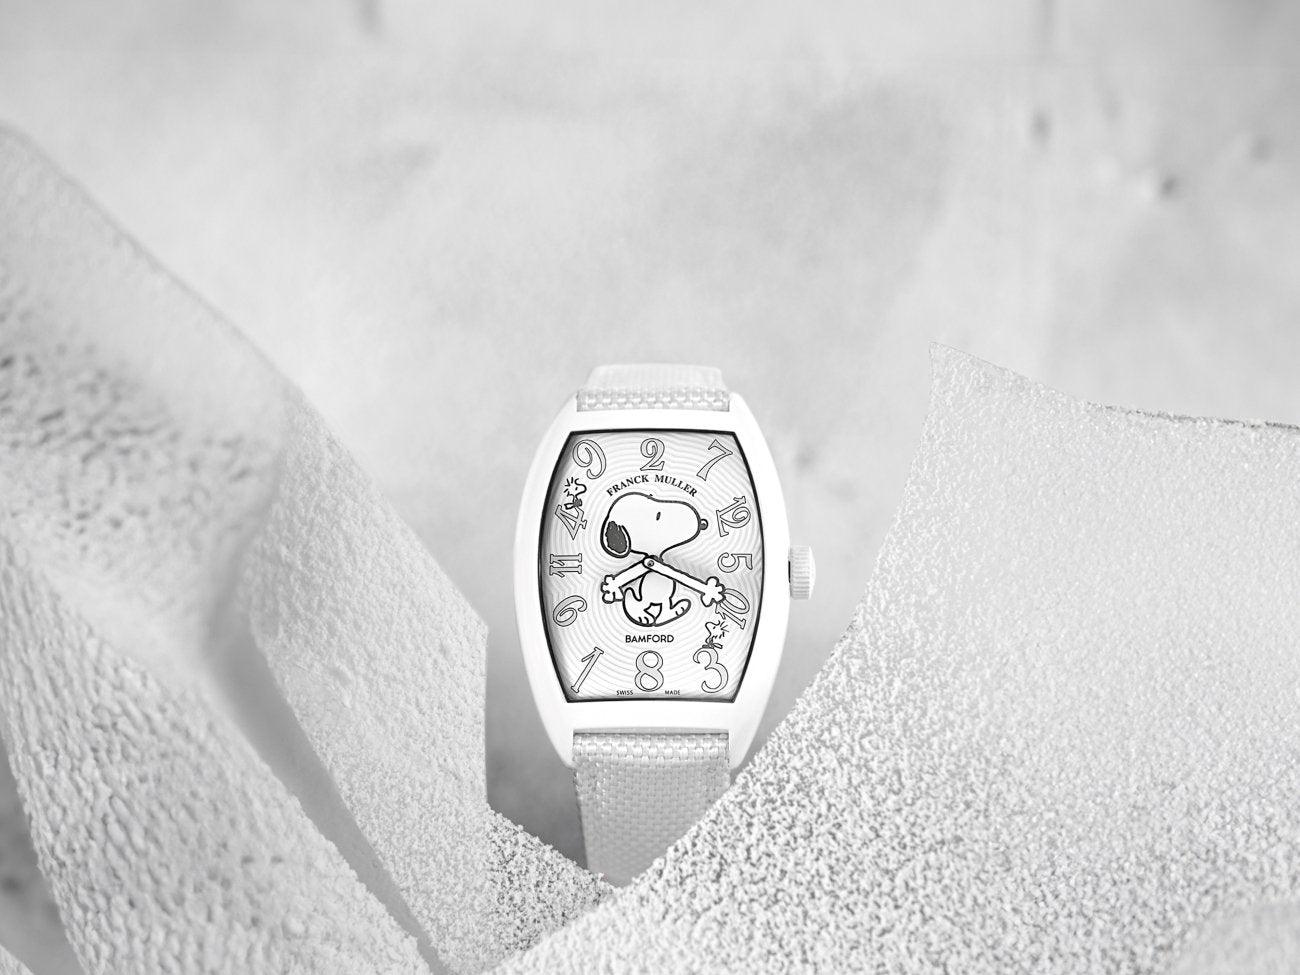 Crazy Hours Arctic Snoopy: A Whimsical Timepiece - WATCHESPEDIA